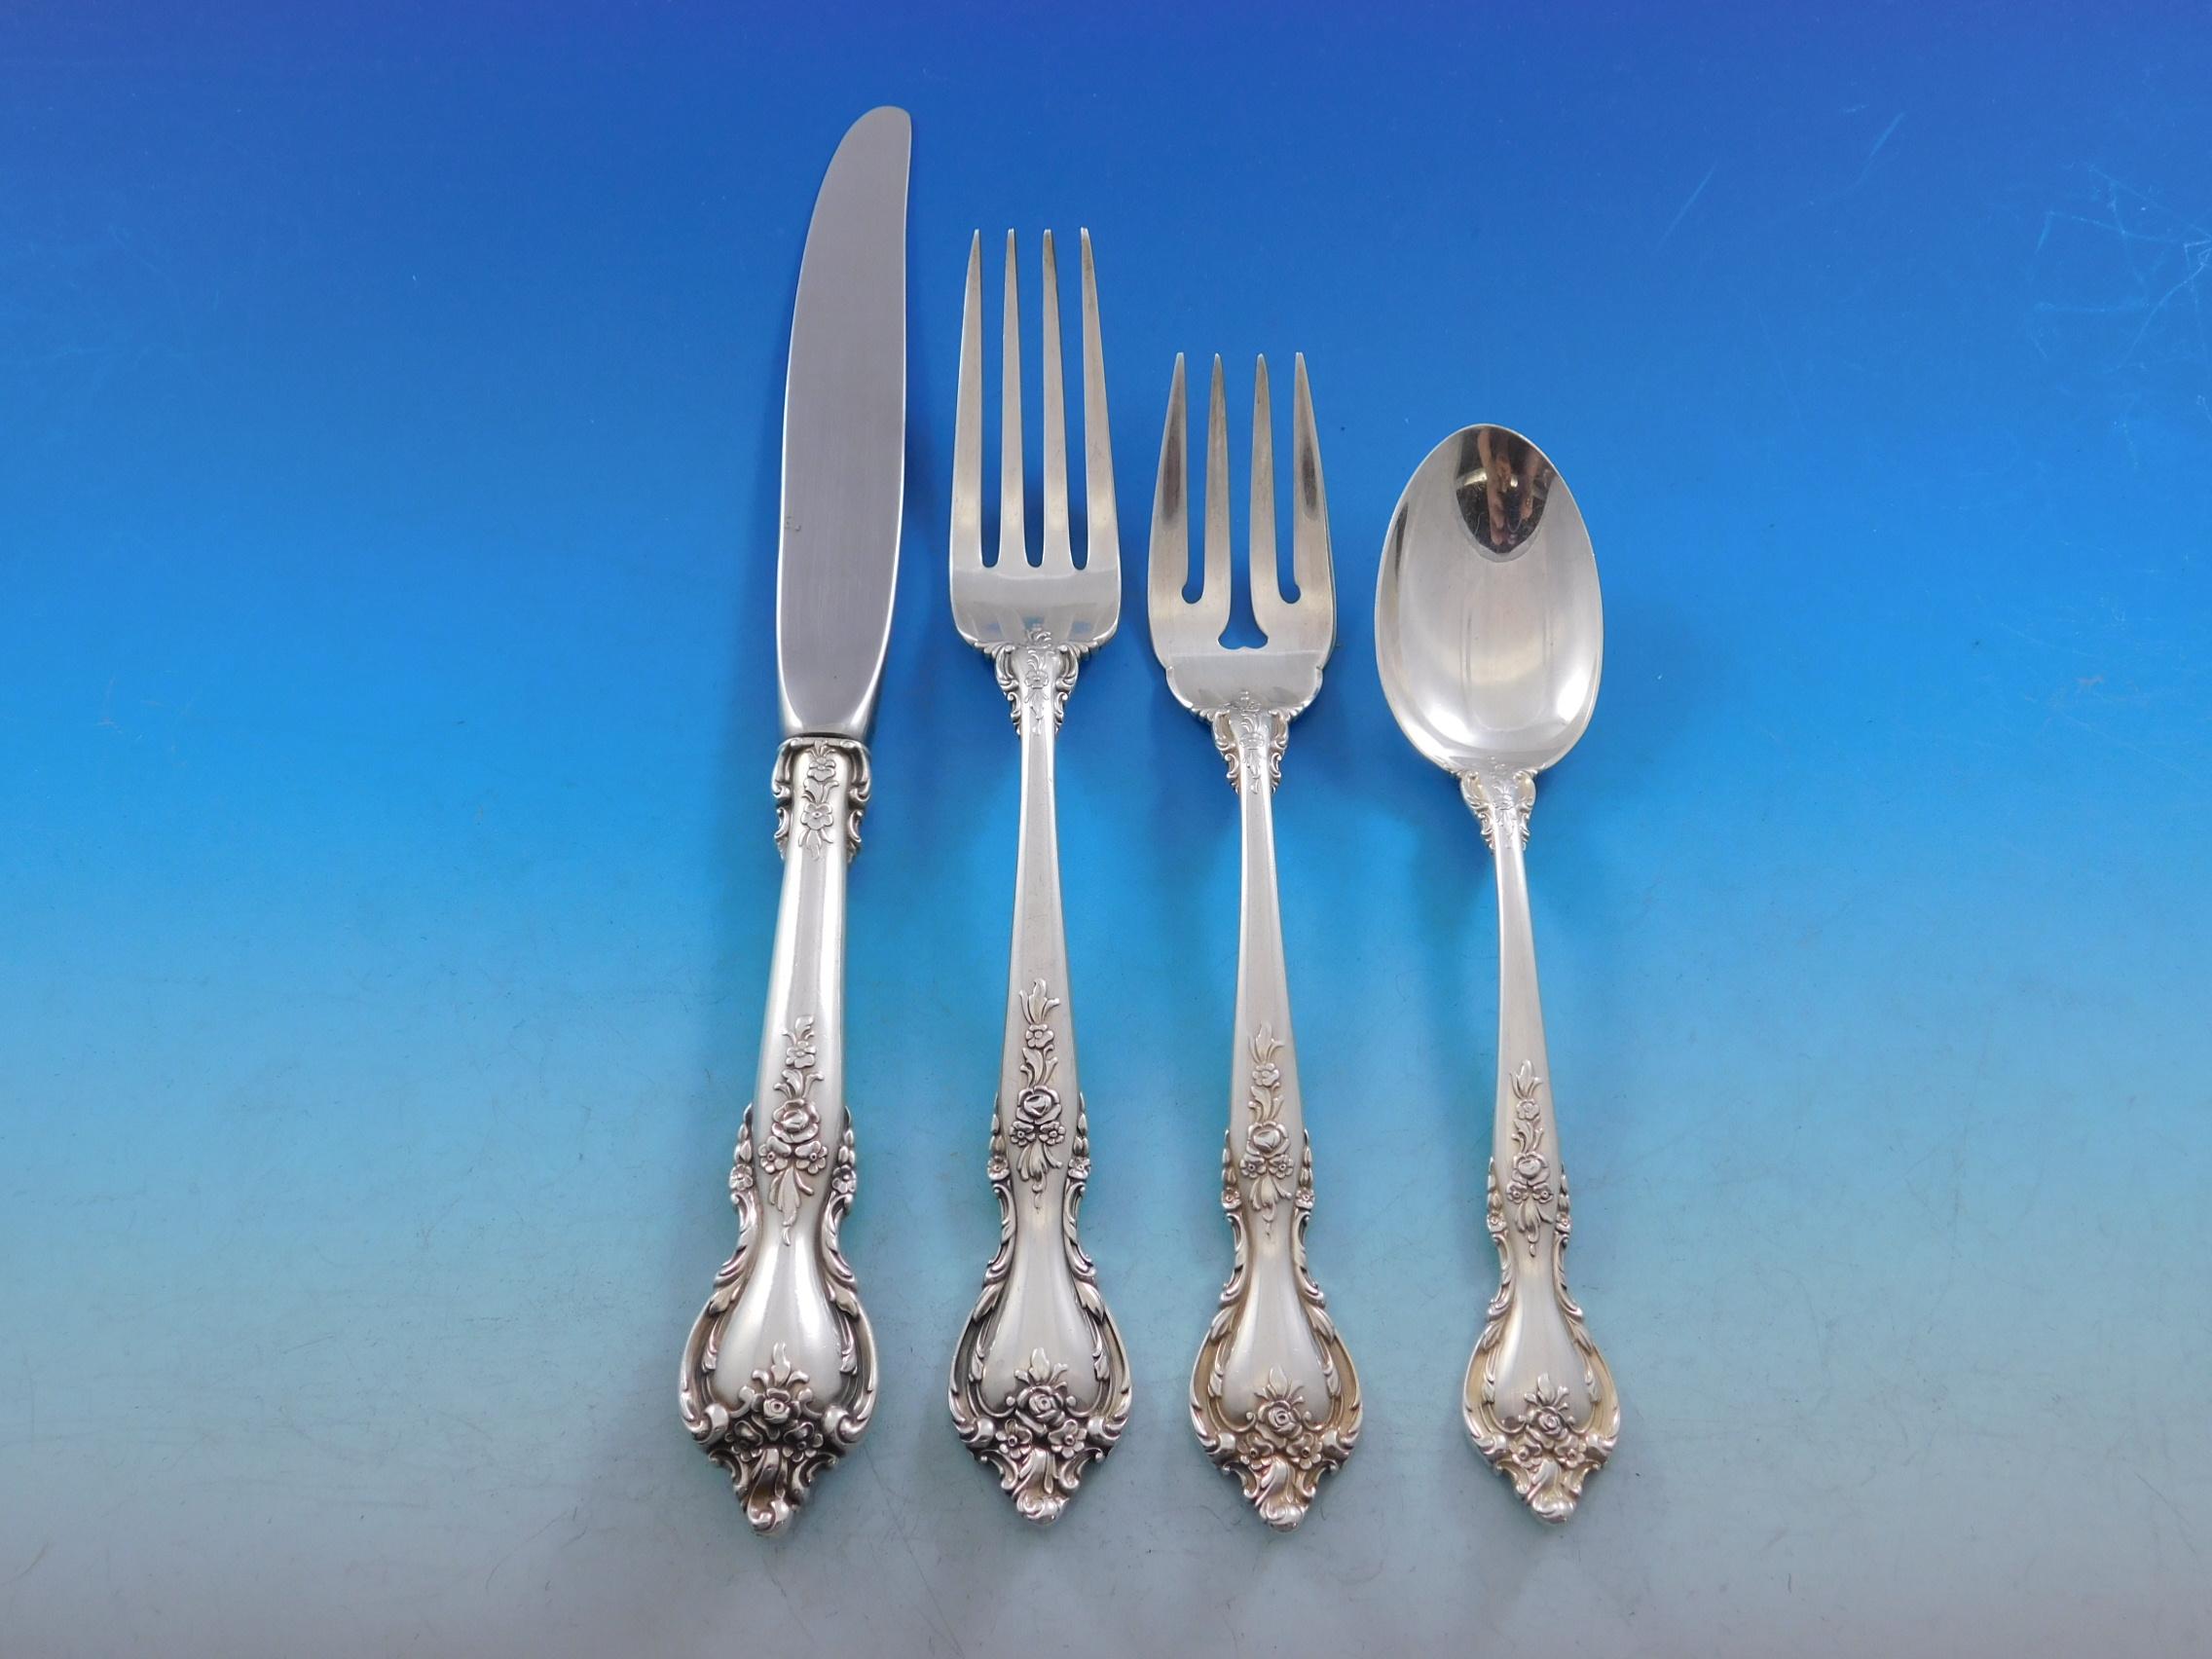 Delacourt by Lunt Sterling Silver Flatware Set for 8 Service 70 Pieces In Excellent Condition For Sale In Big Bend, WI